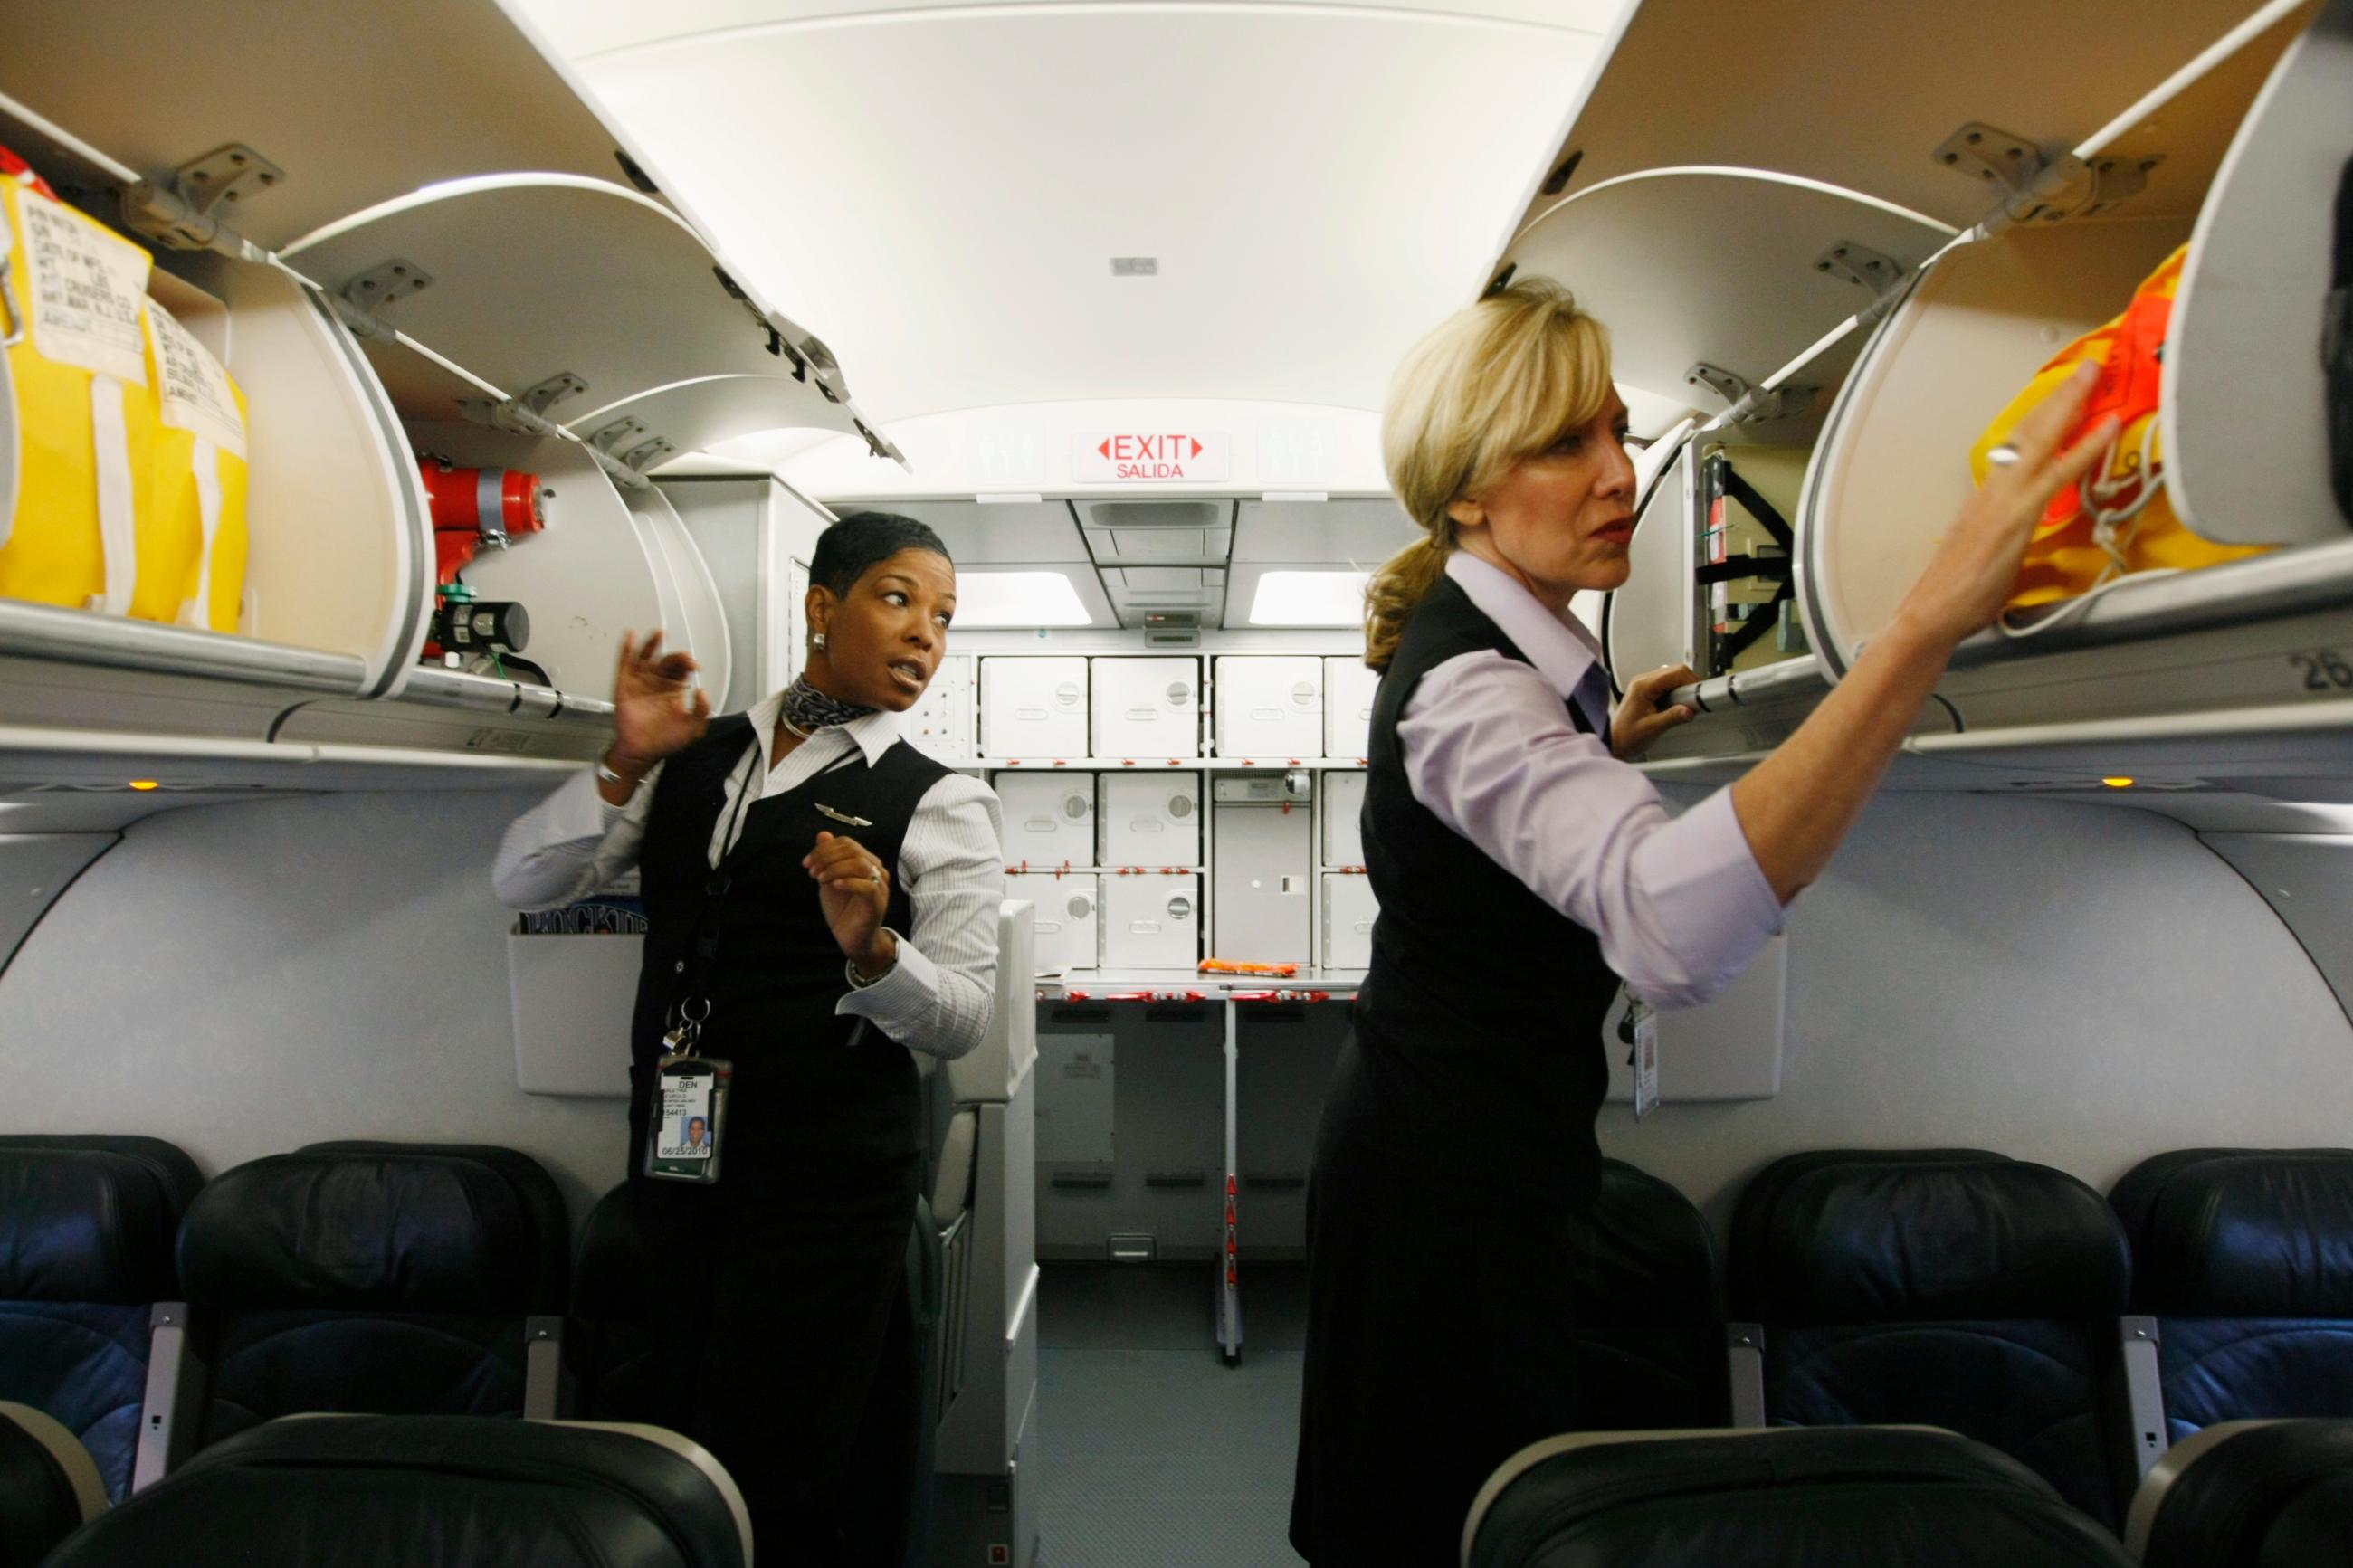 Frontier Airlines flight attendants check safety equipment